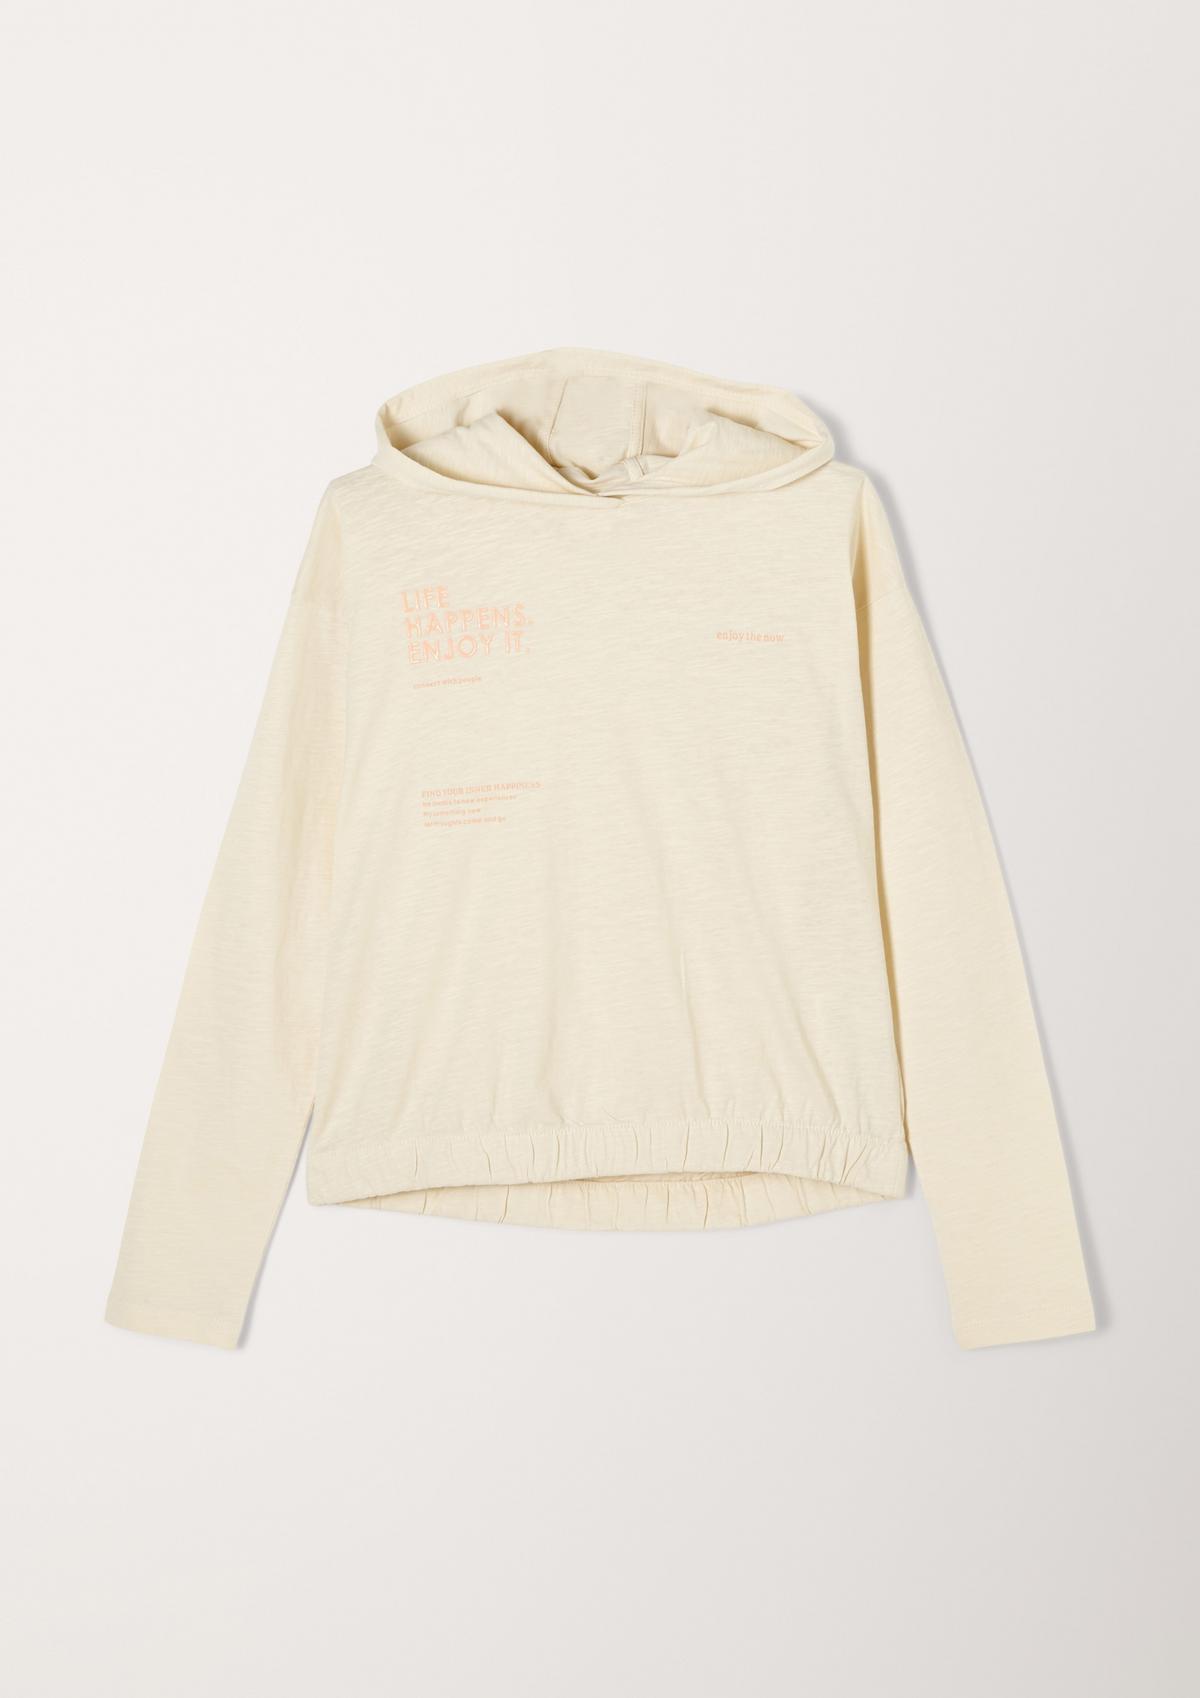 s.Oliver Lightweight hooded top with printed lettering